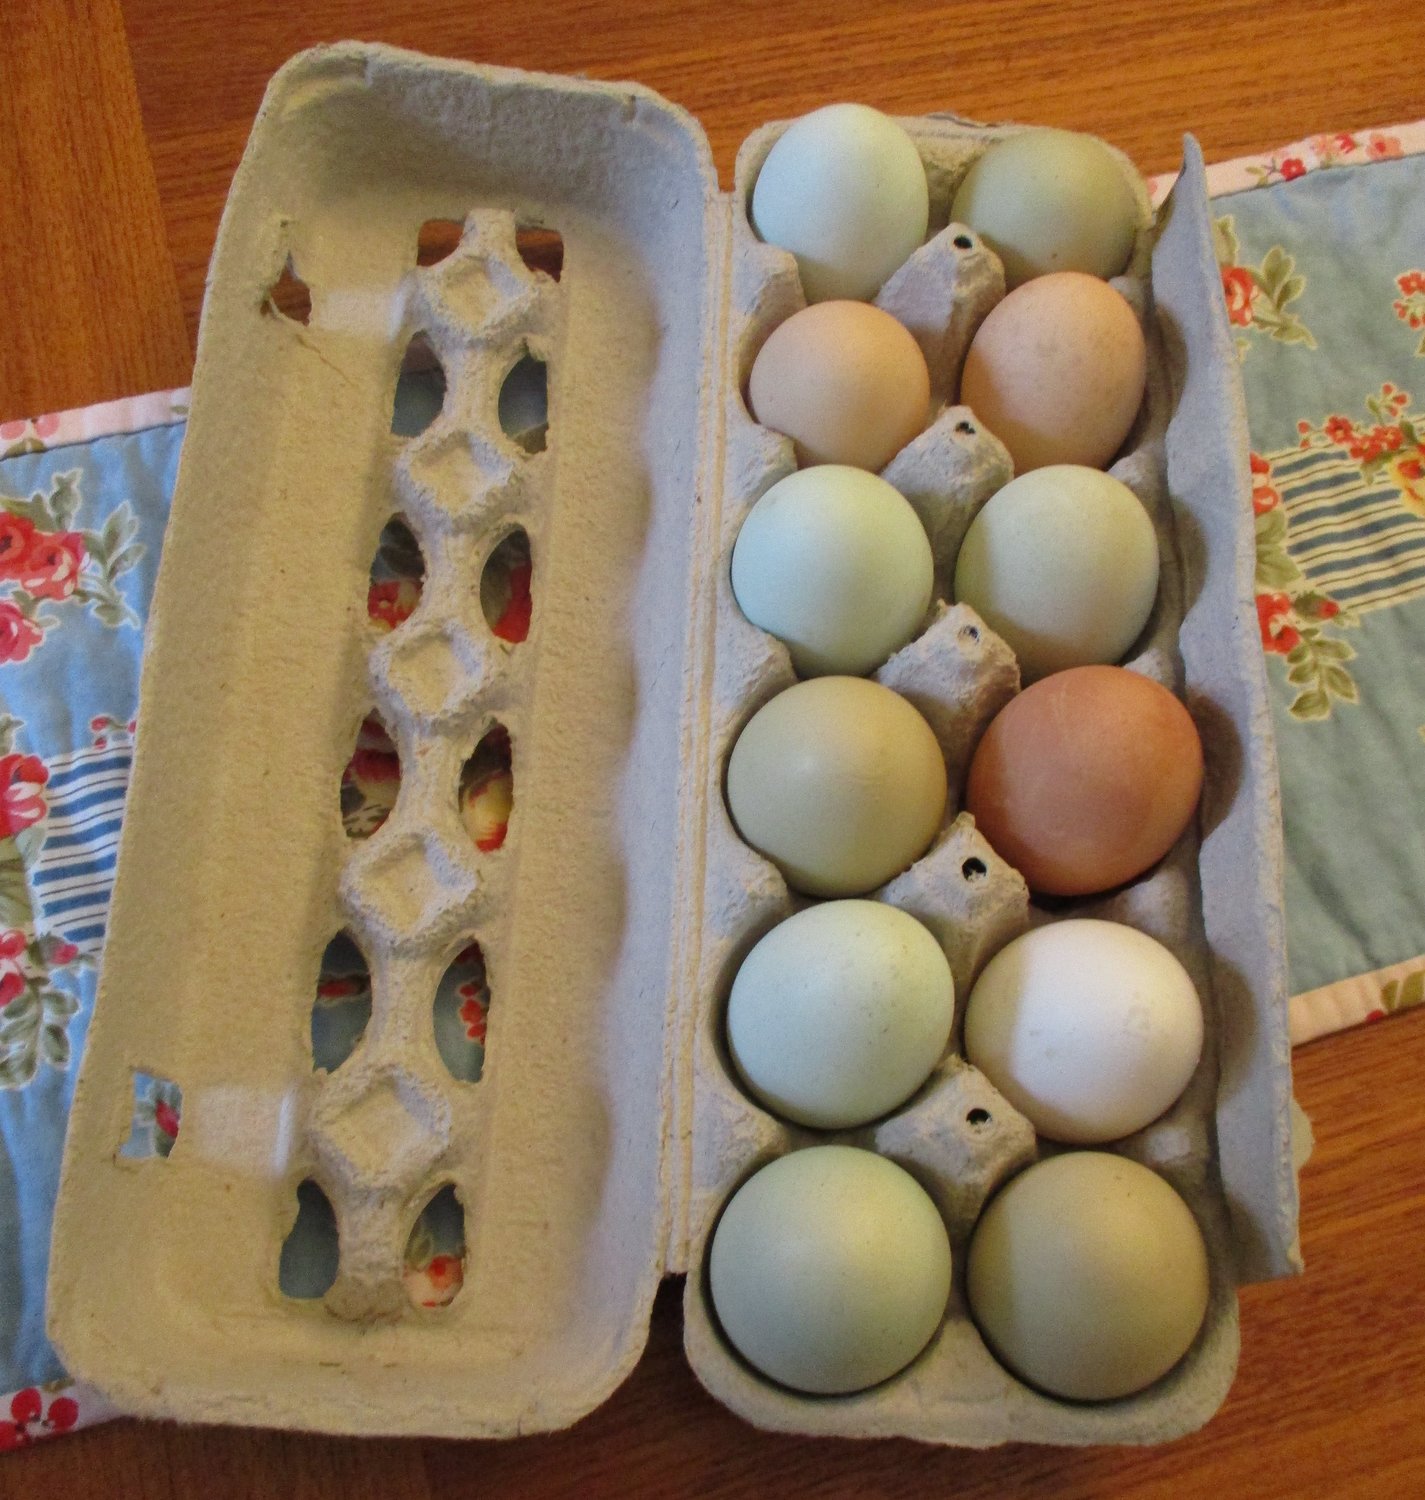 Eggs, straight from the farm.